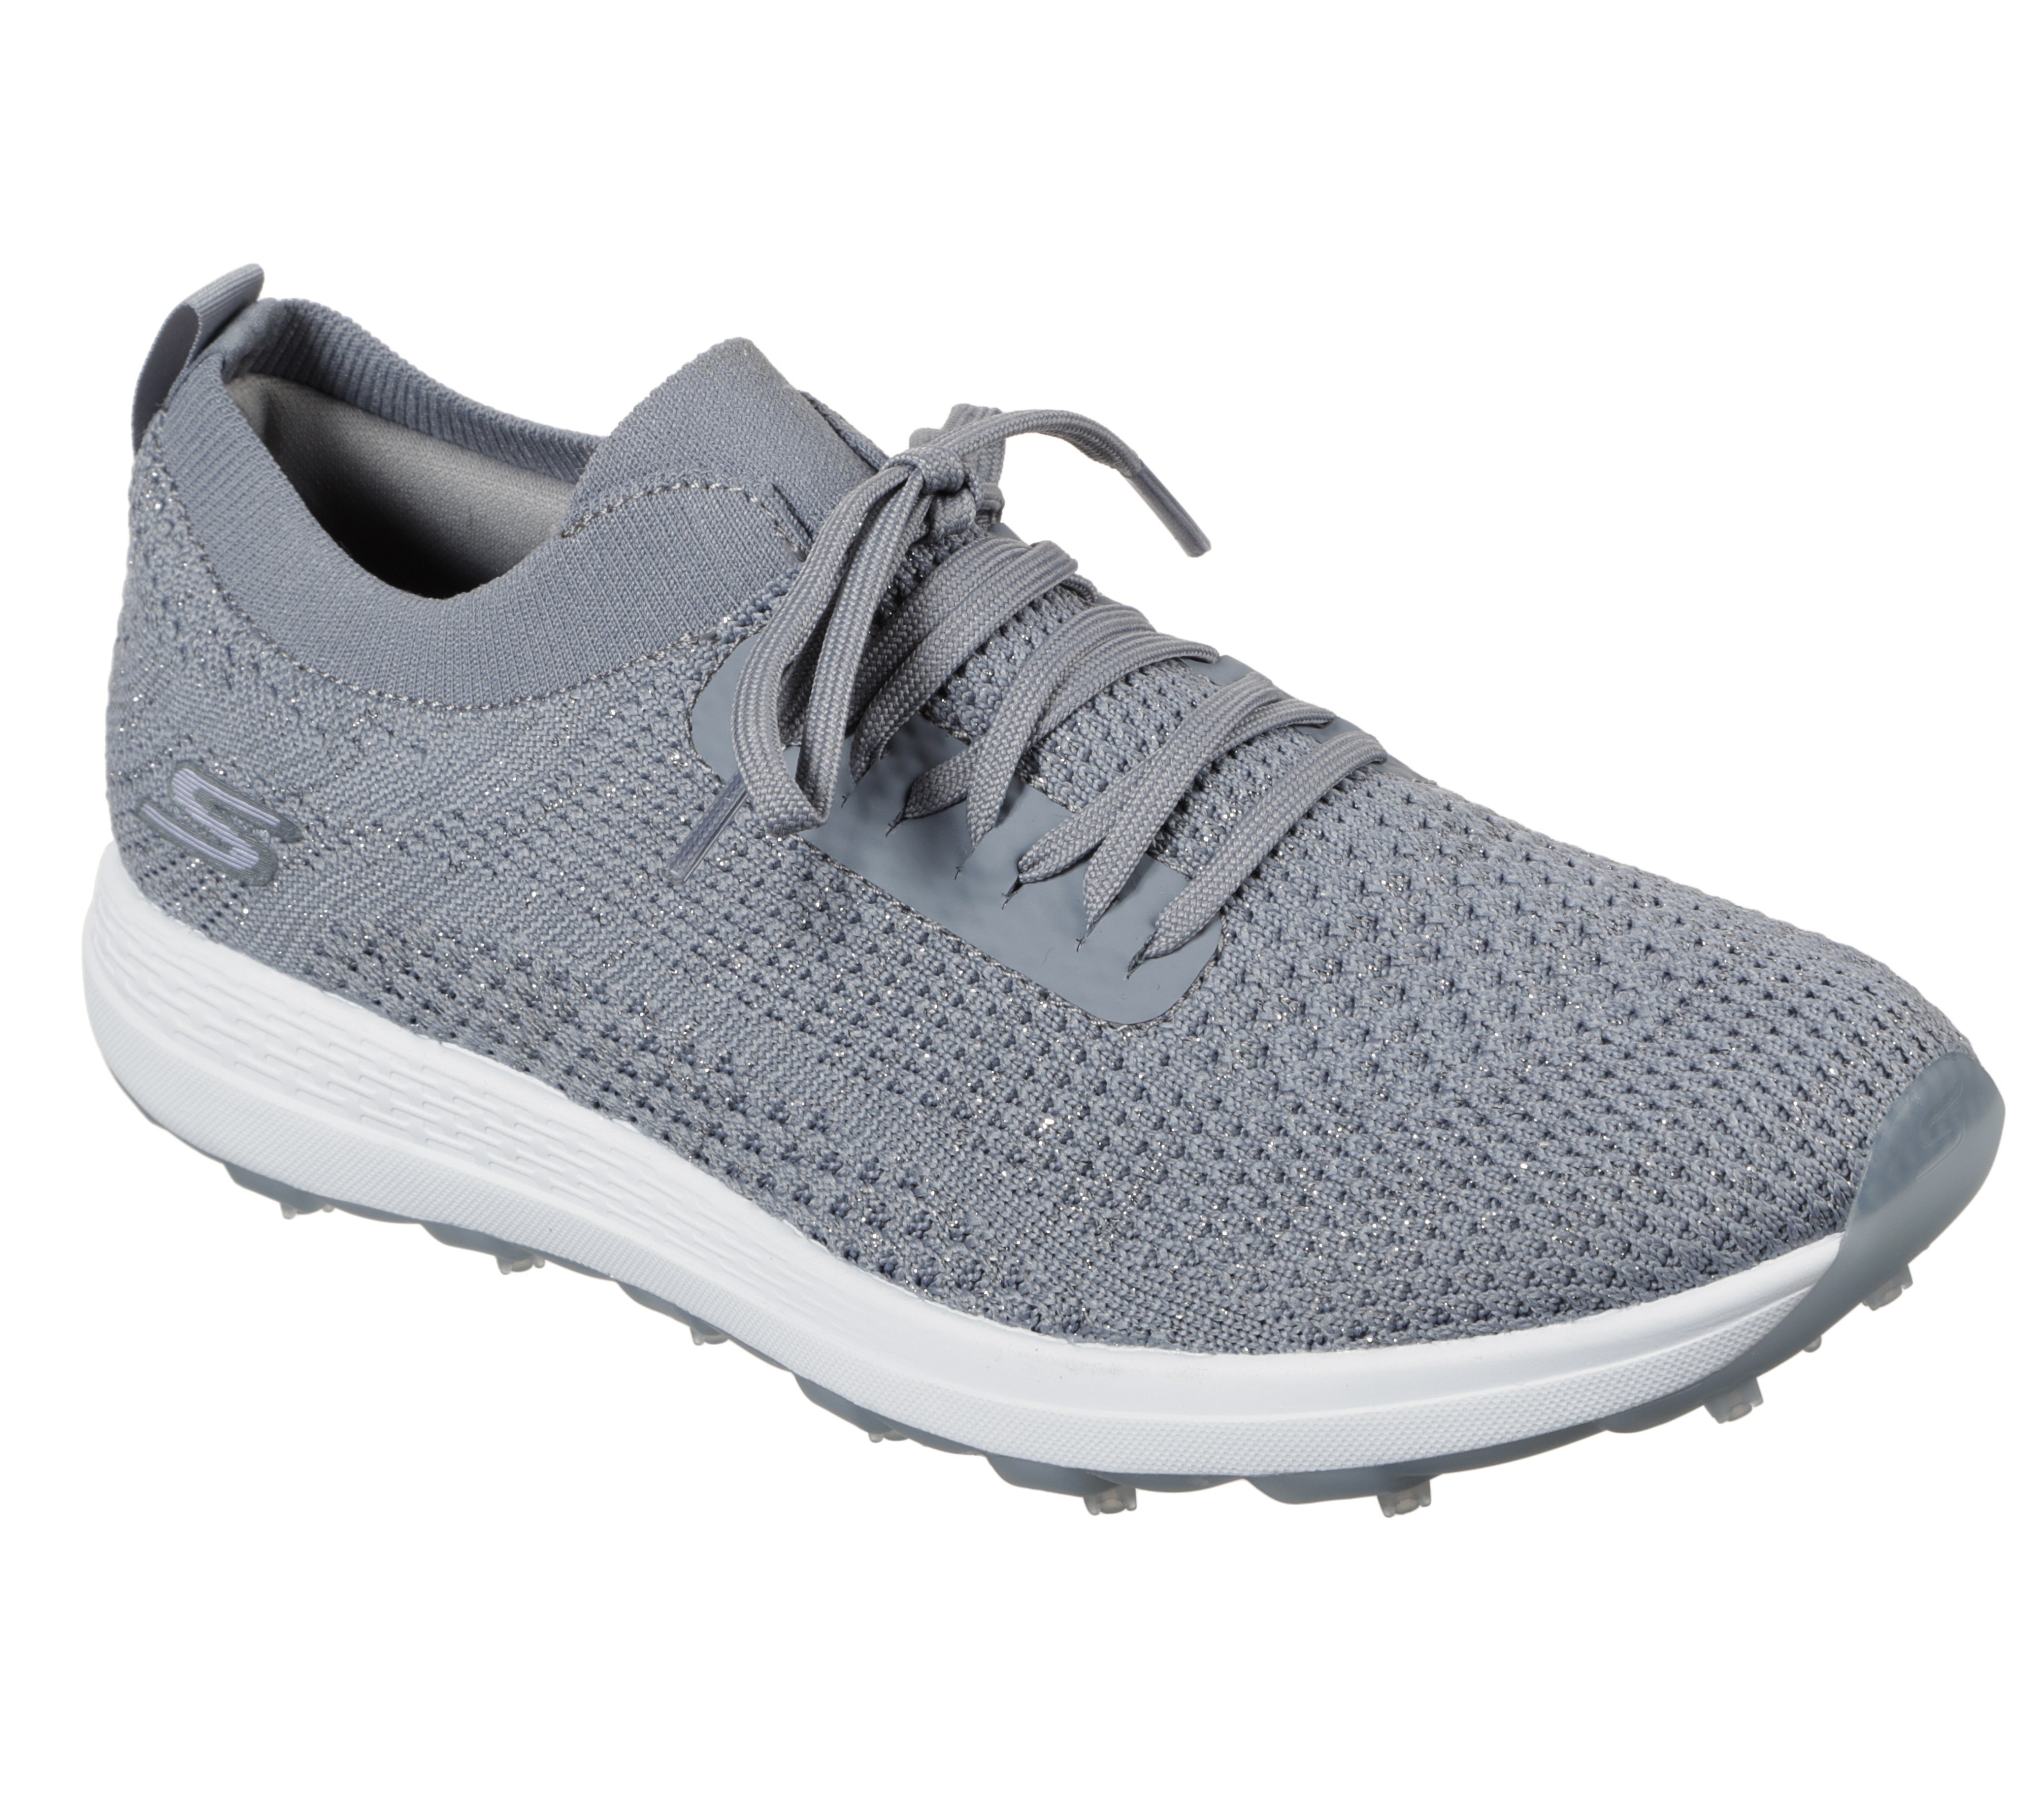 skechers go golf max review